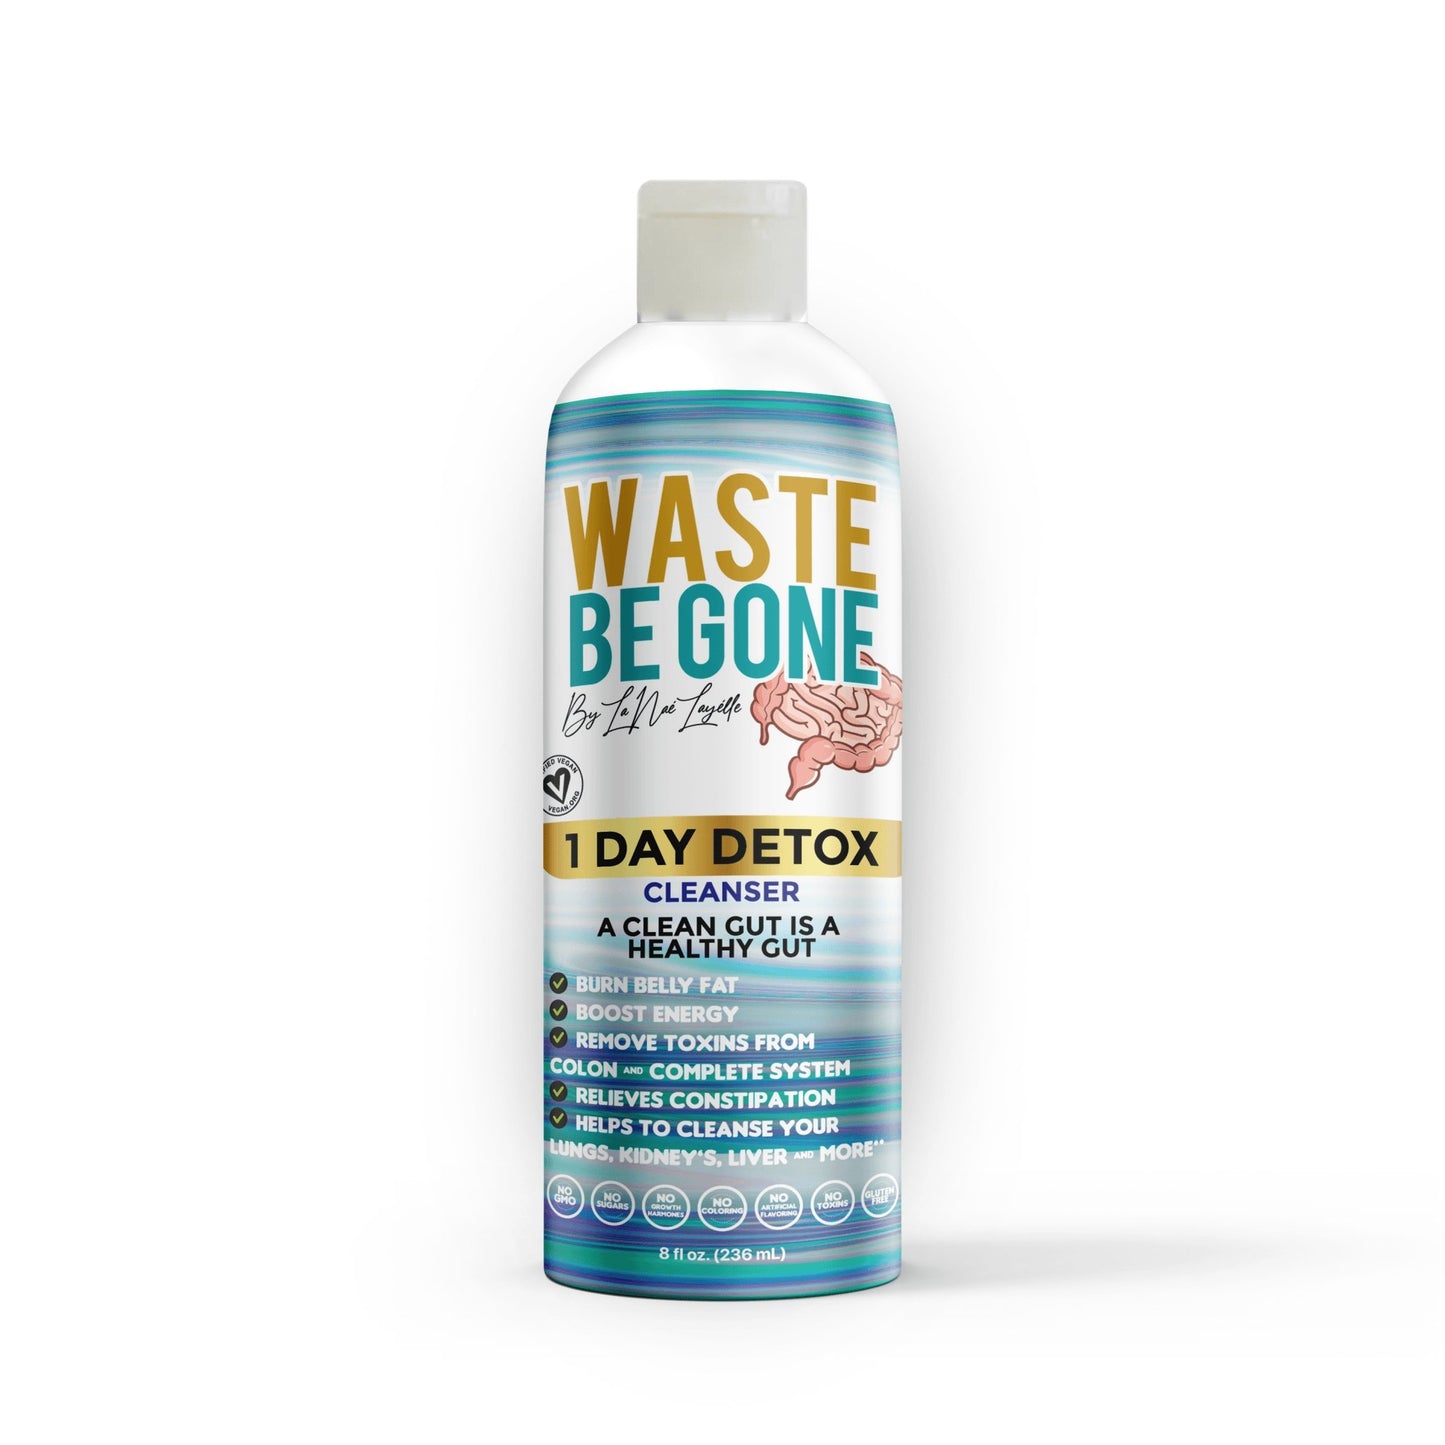 1 Day Cleanser - Waistbegoneofficial